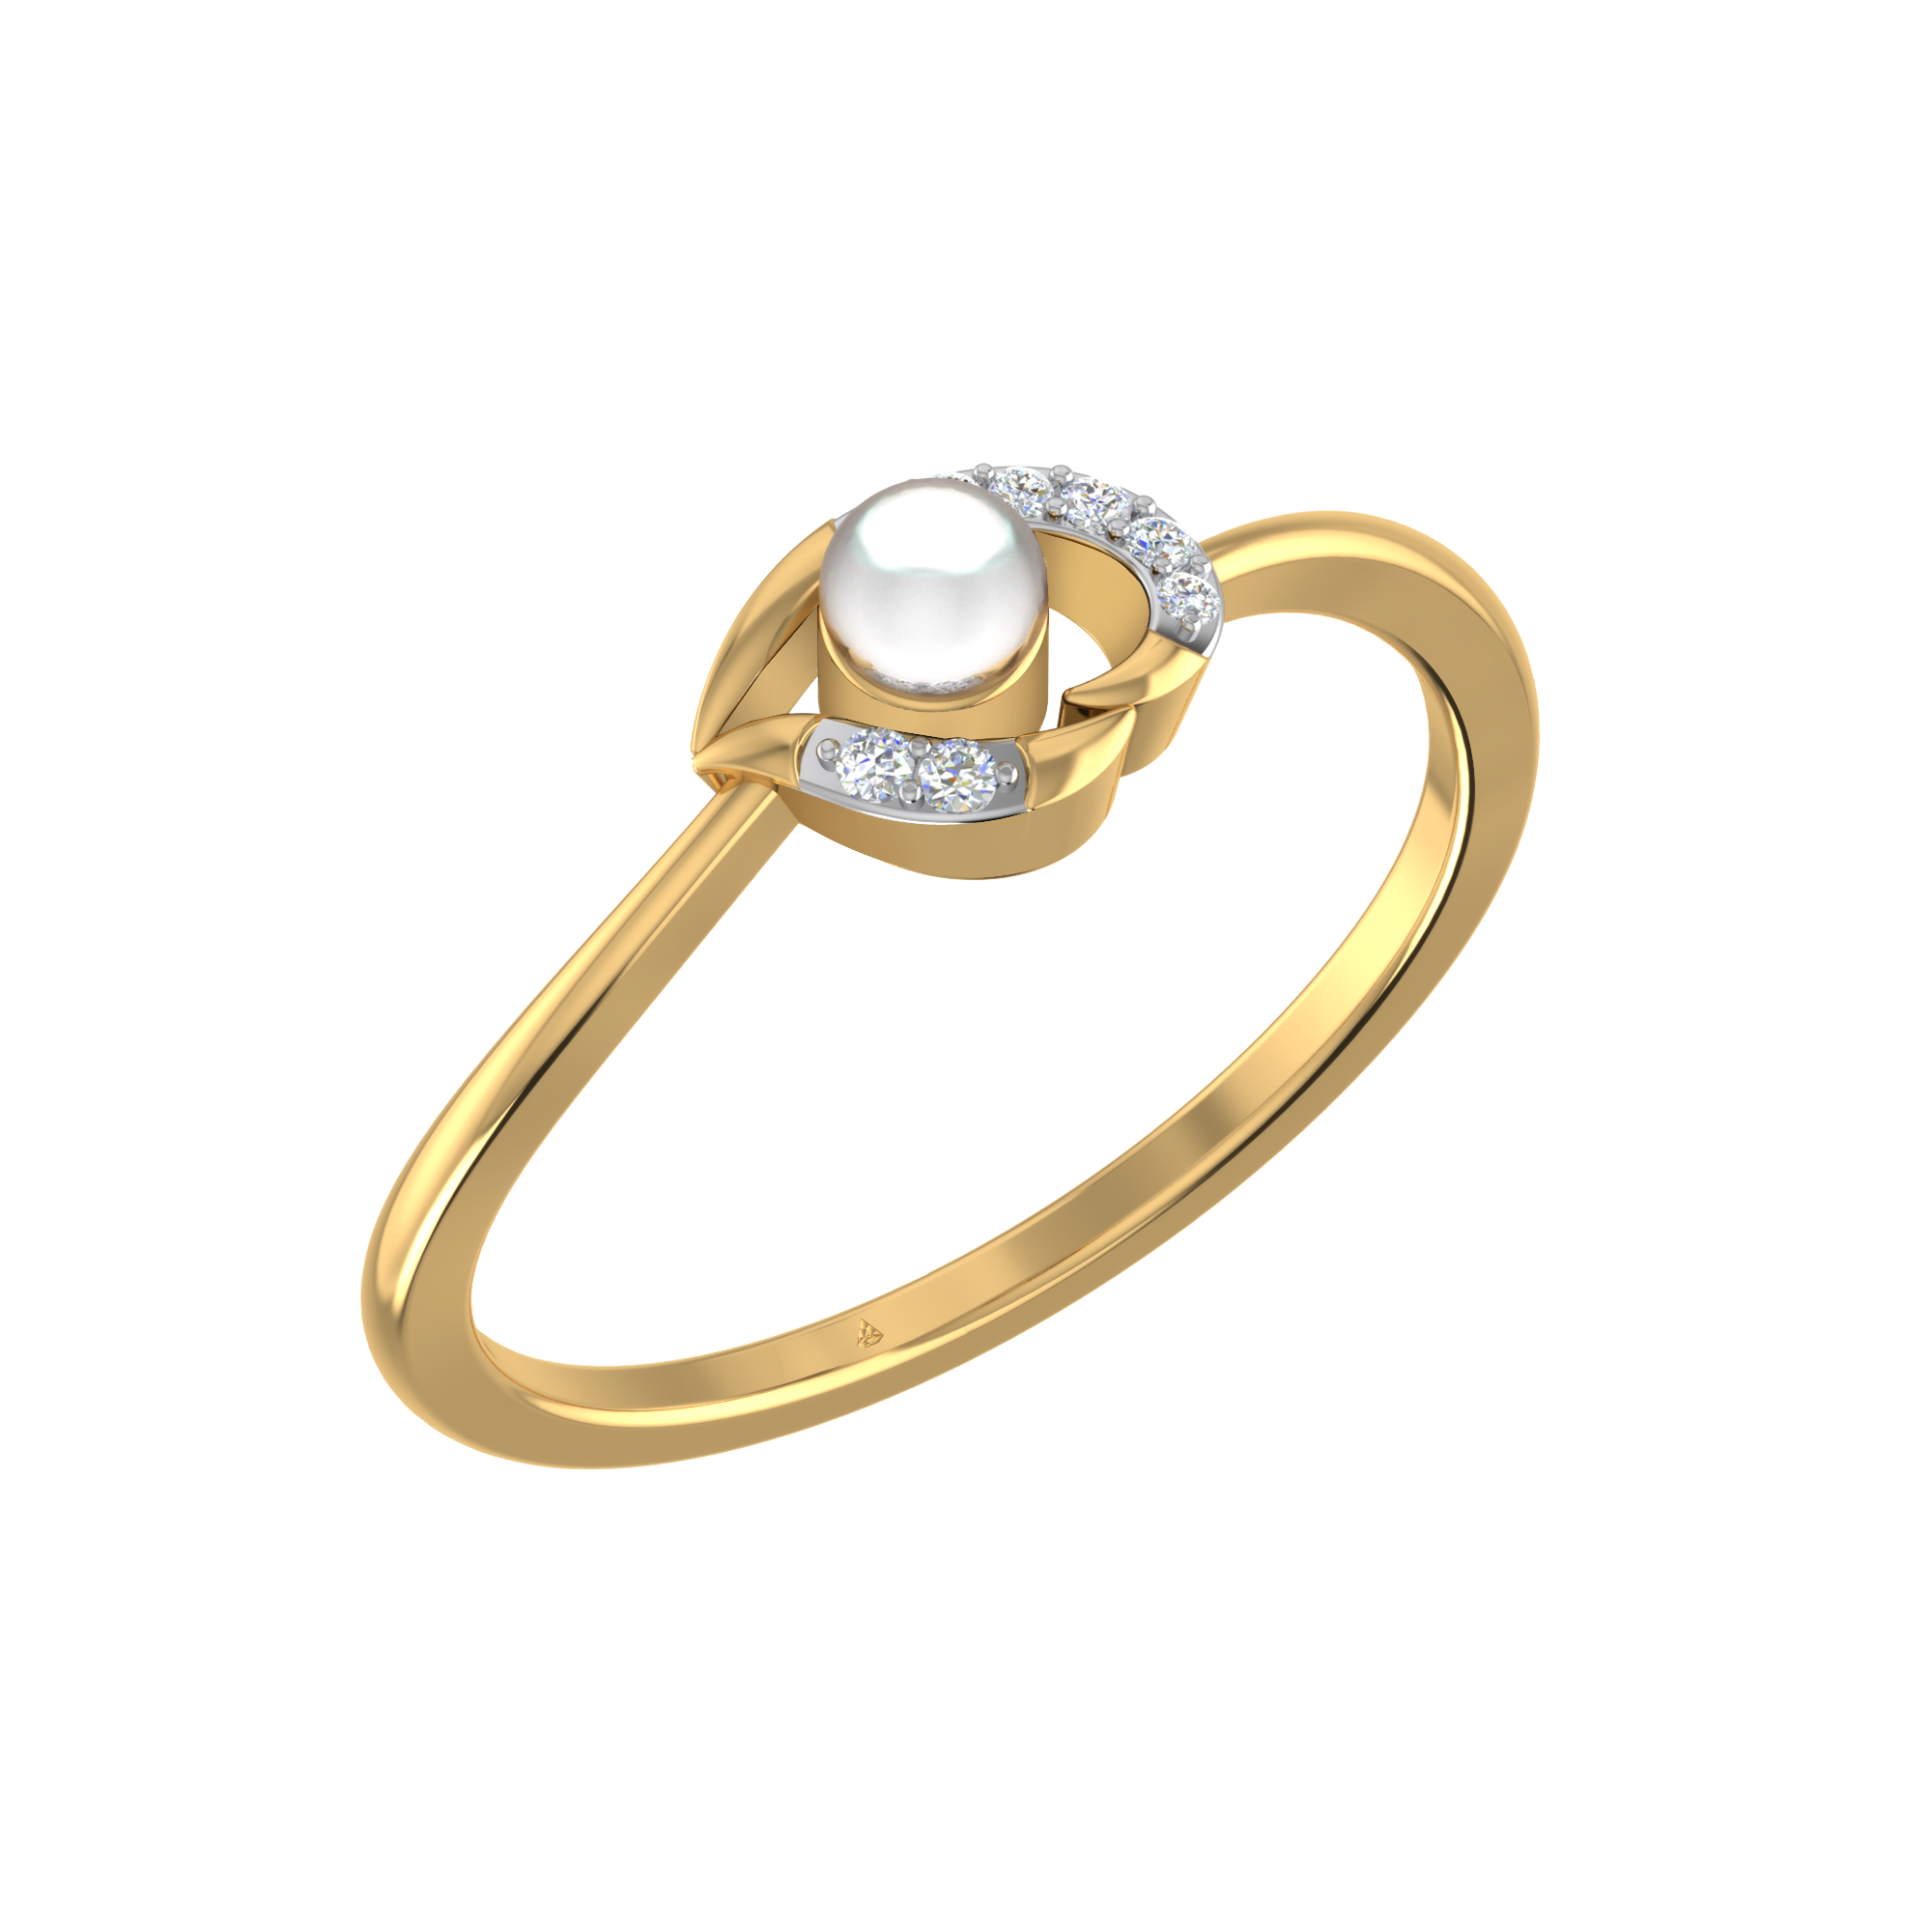 PEARL DIAMOND COCKTAIL RING 14k YELLOW GOLD ESTATE NATURAL BYPASS  ANNIVERSARY